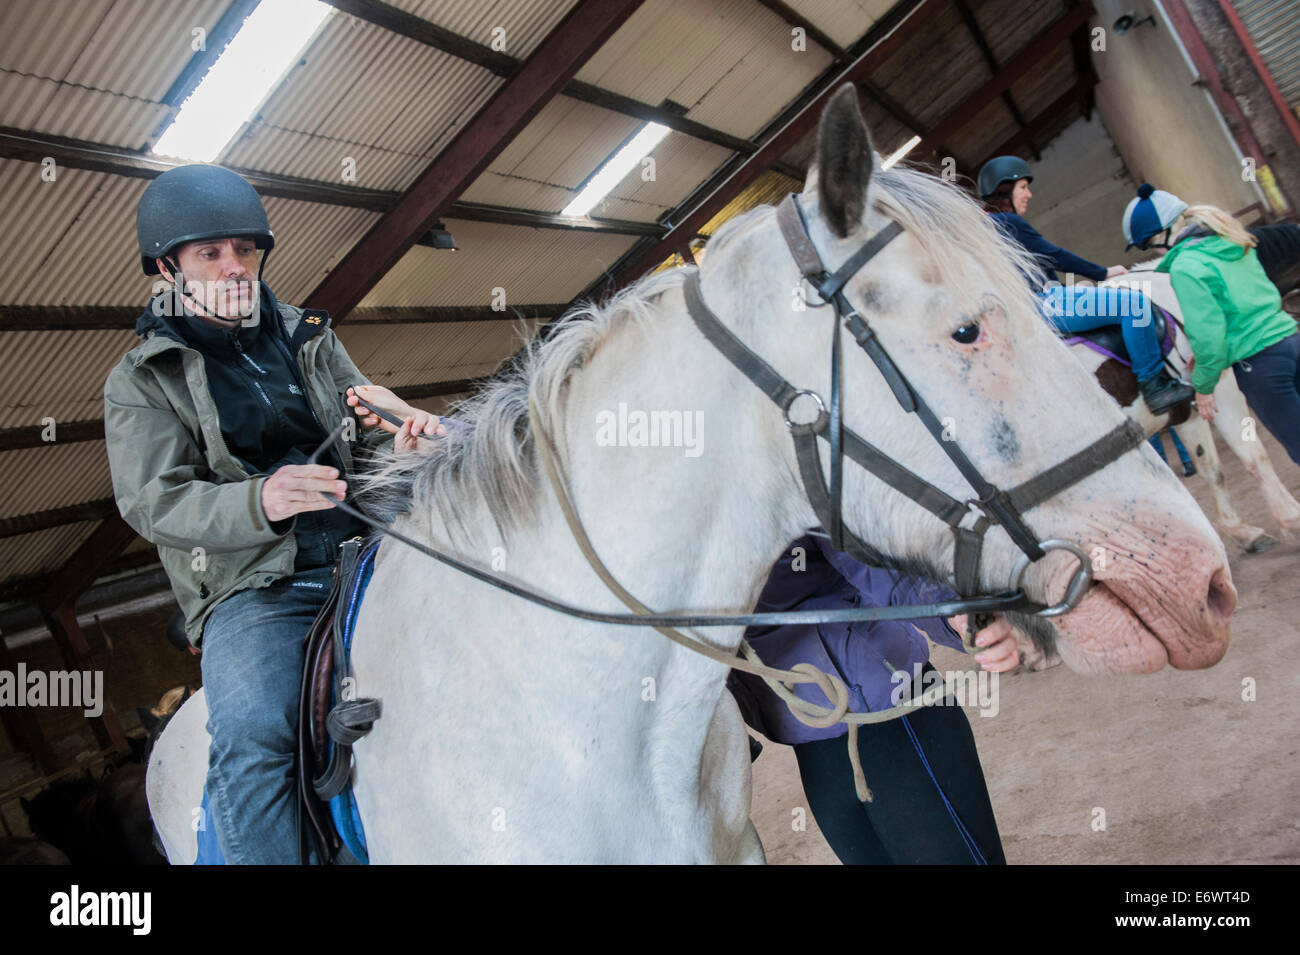 Horse riding for beginners near Newport, South Wales, UK. Stock Photo